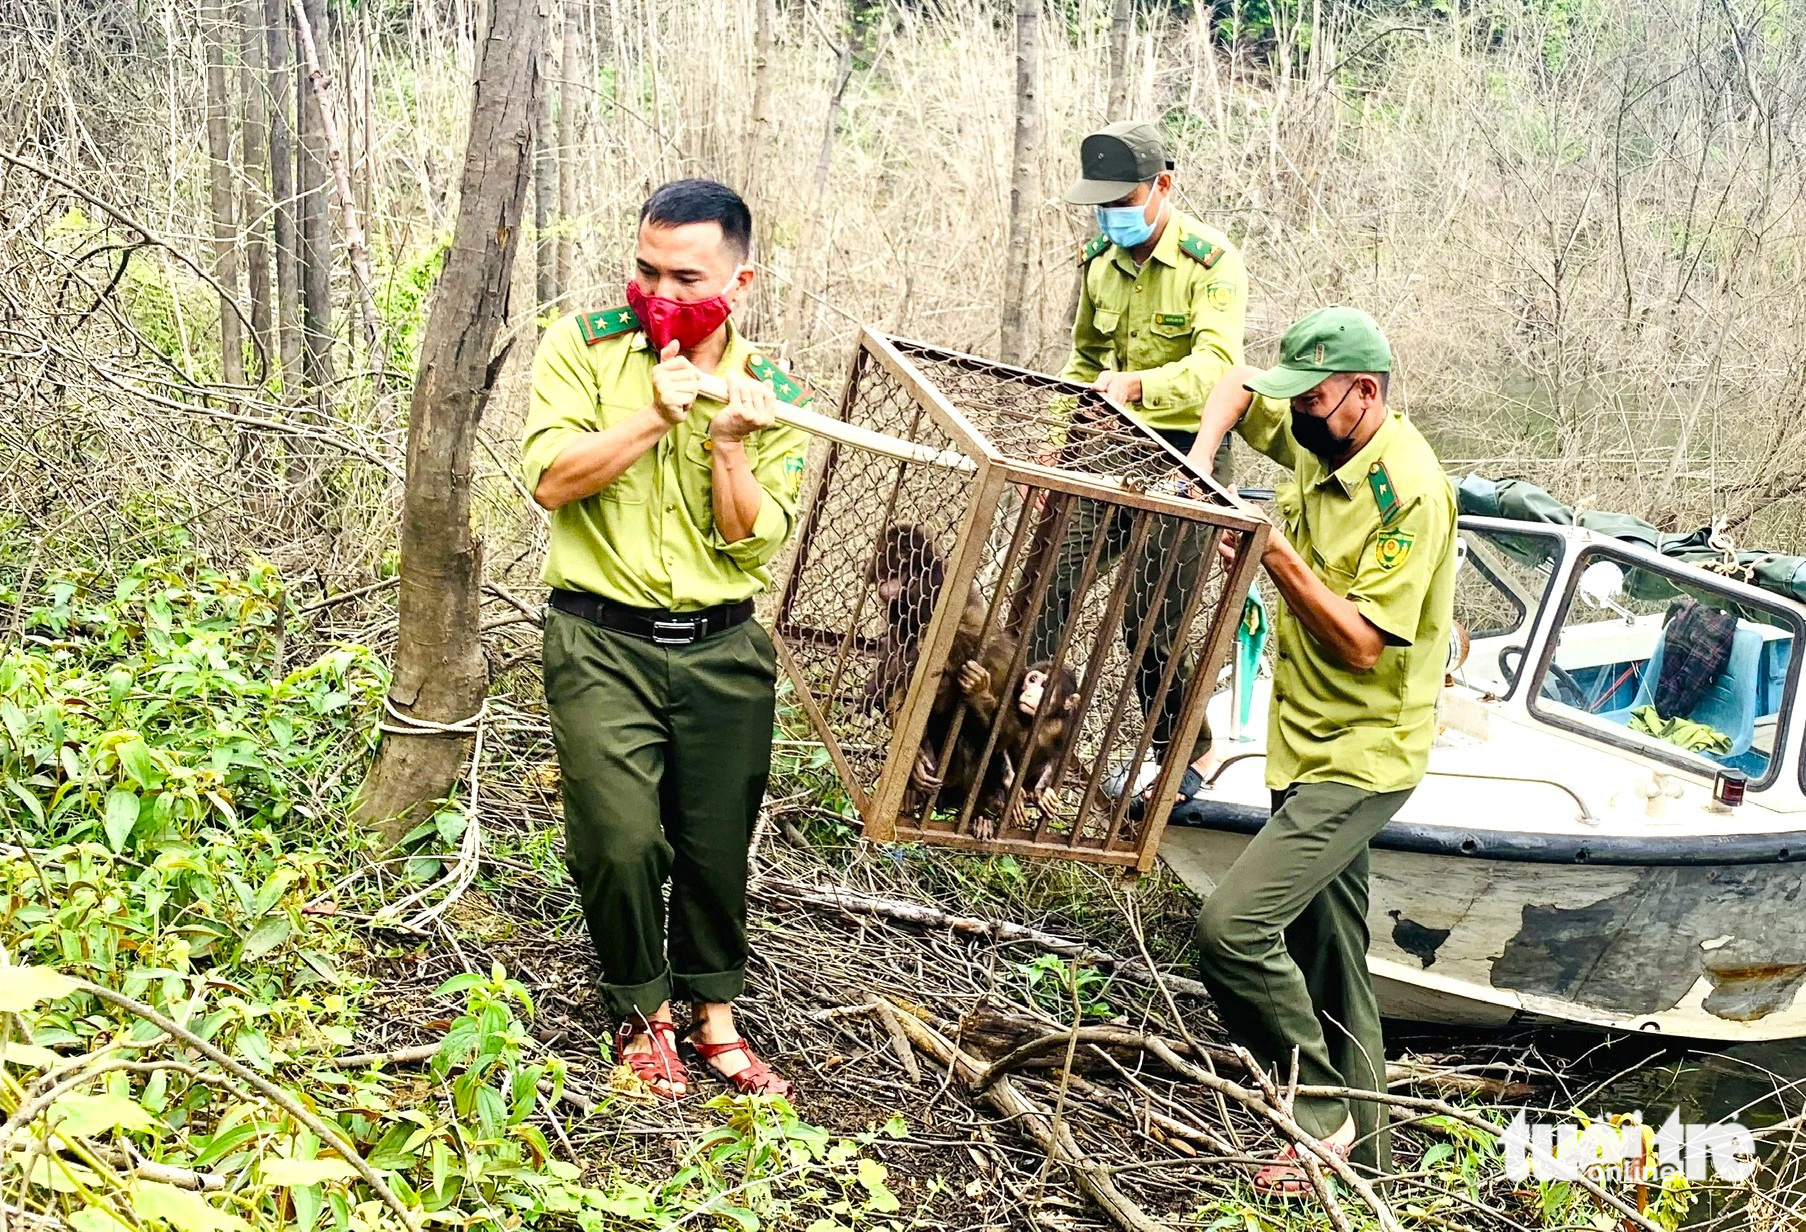 Rangers release monkeys in an island situated in Ngan Truoi Lake within Vu Quang National Park in Vu Quang District, Ha Tinh Province, north-central Vietnam. Photo: Le Minh / Tuoi Tre